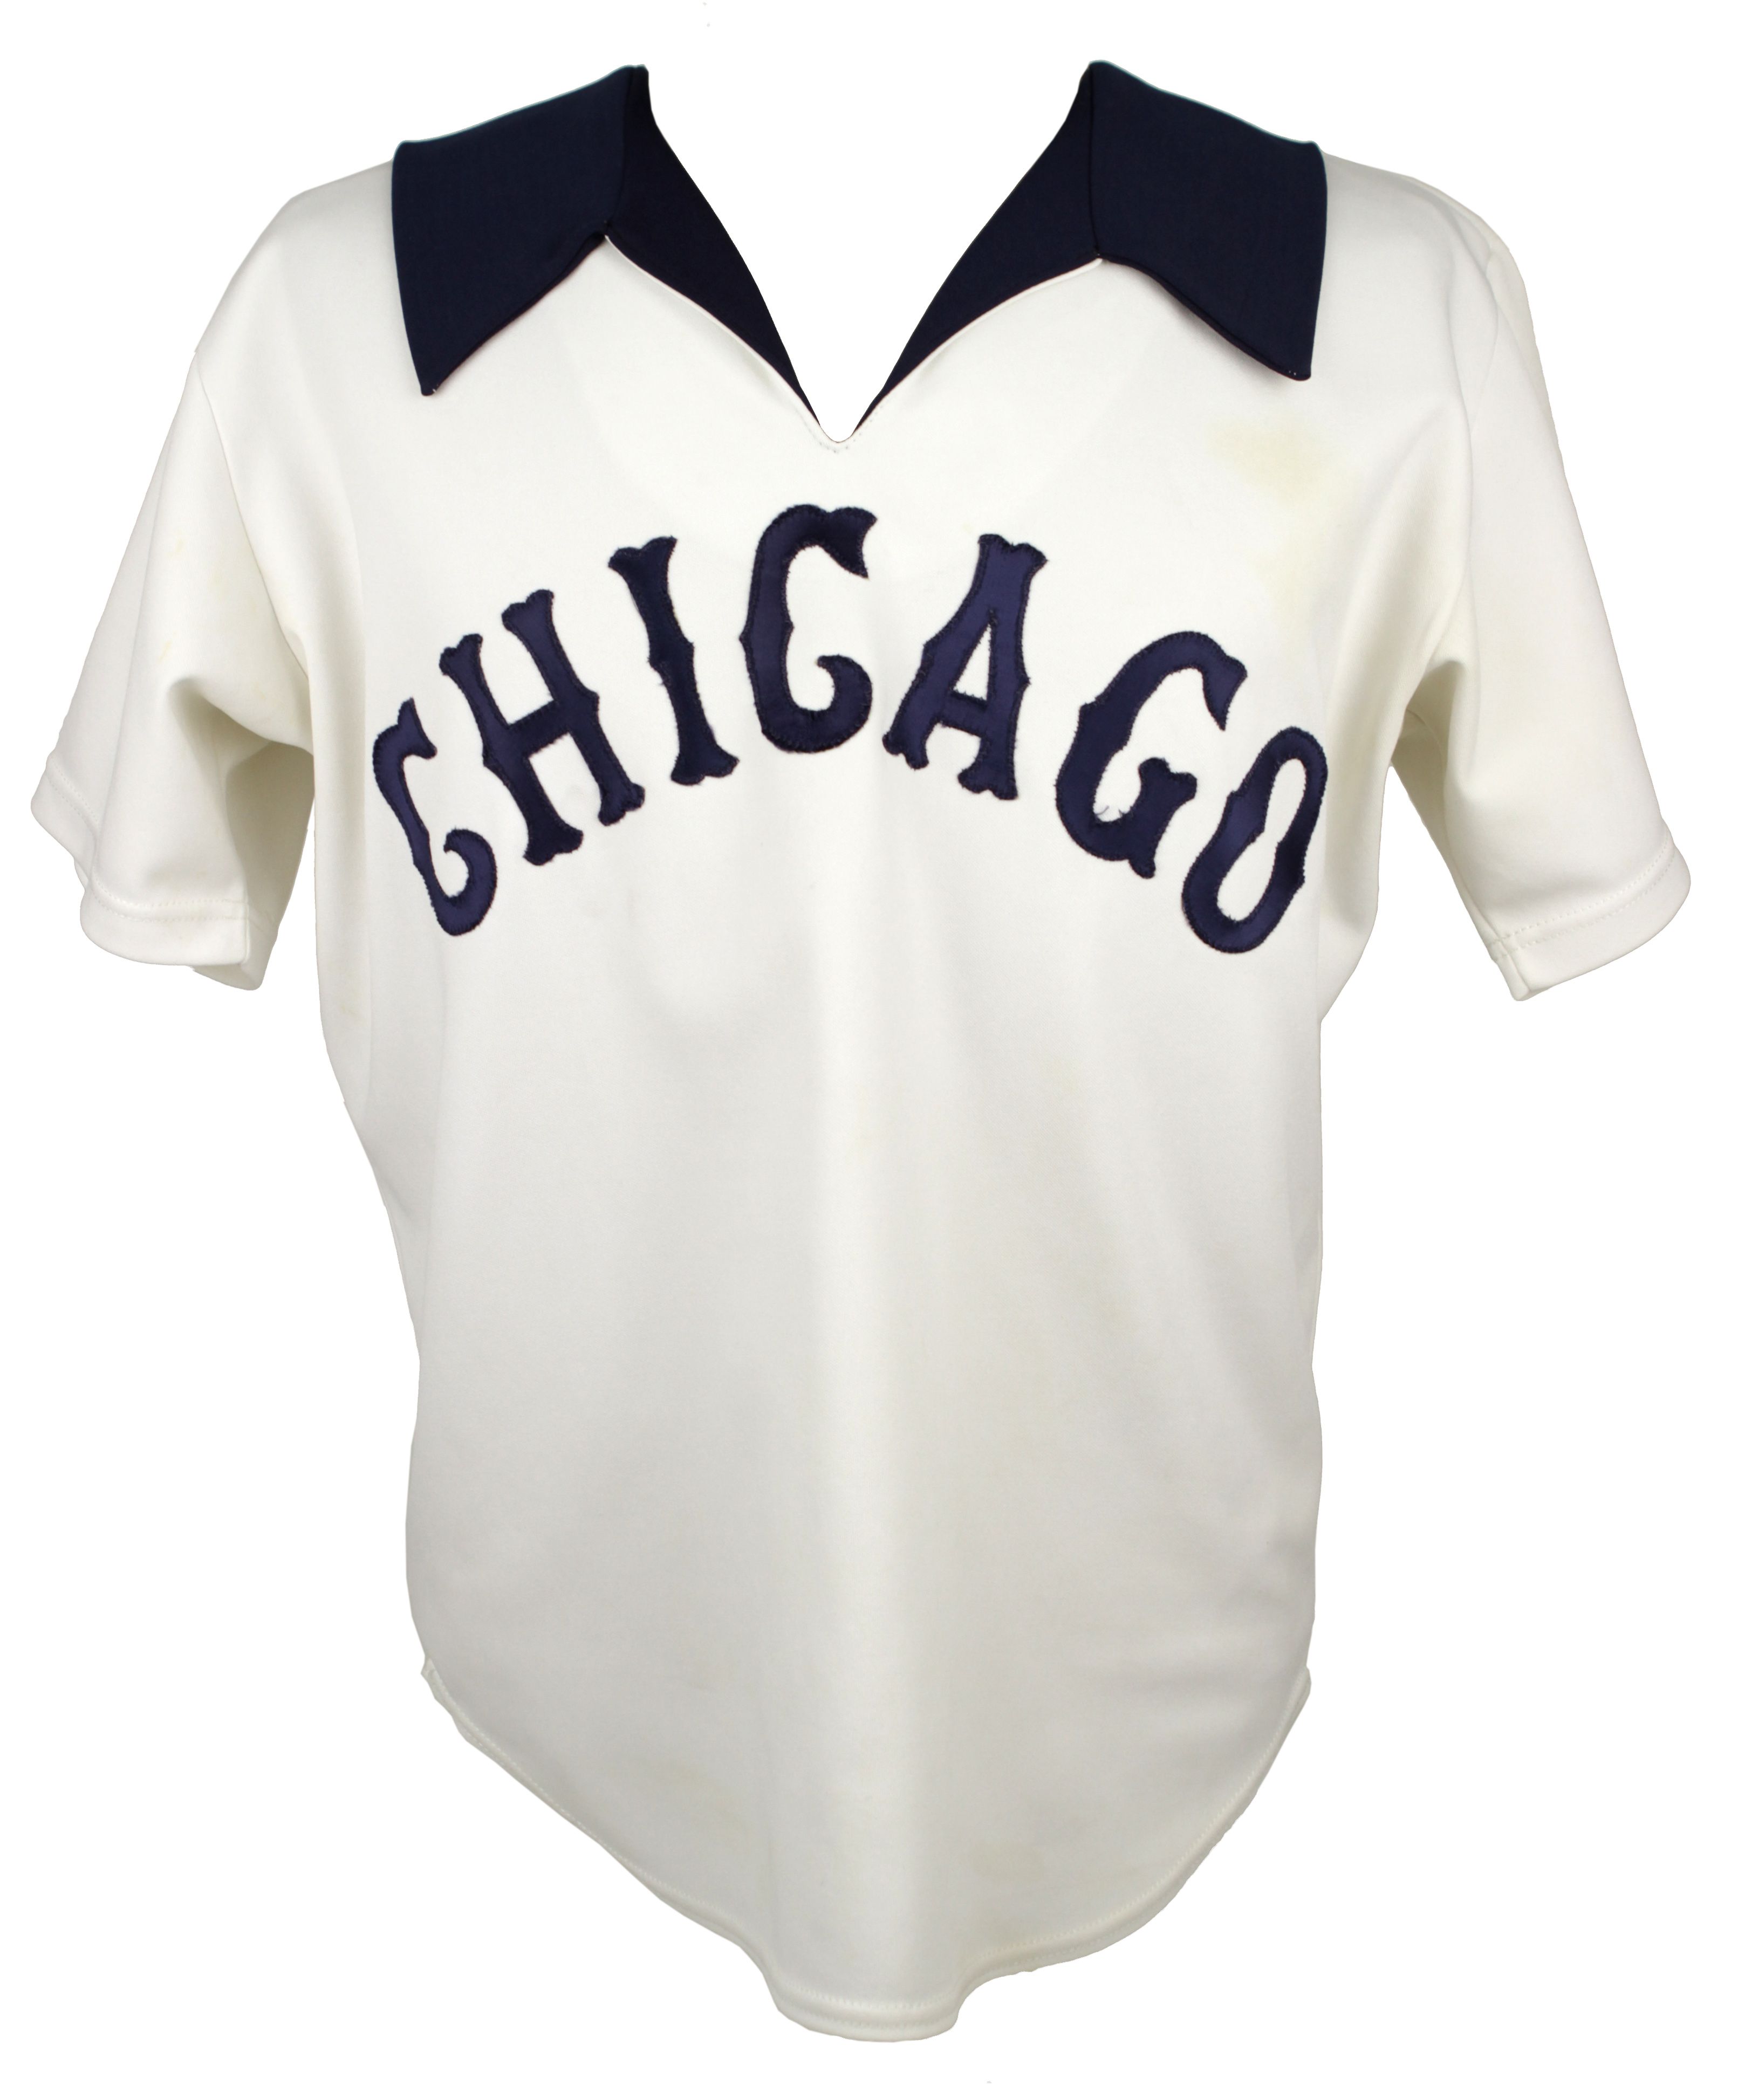 1976 White Sox Uniforms -- Not cool  Chicago white sox baseball, White sox  baseball, Chicago baseball